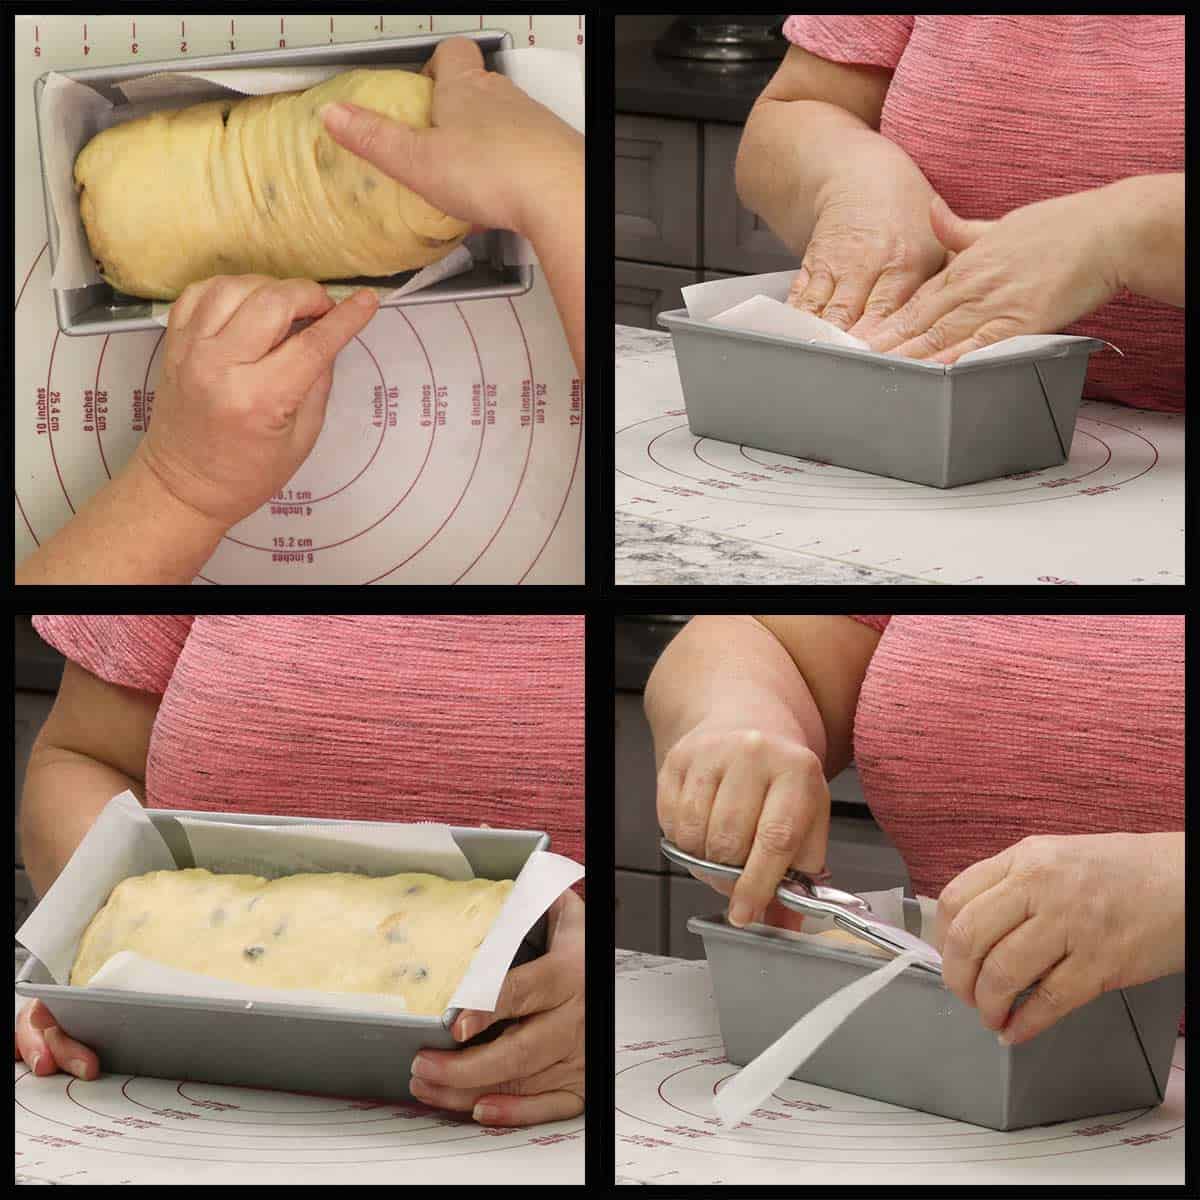 putting the dough into the loaf pan.